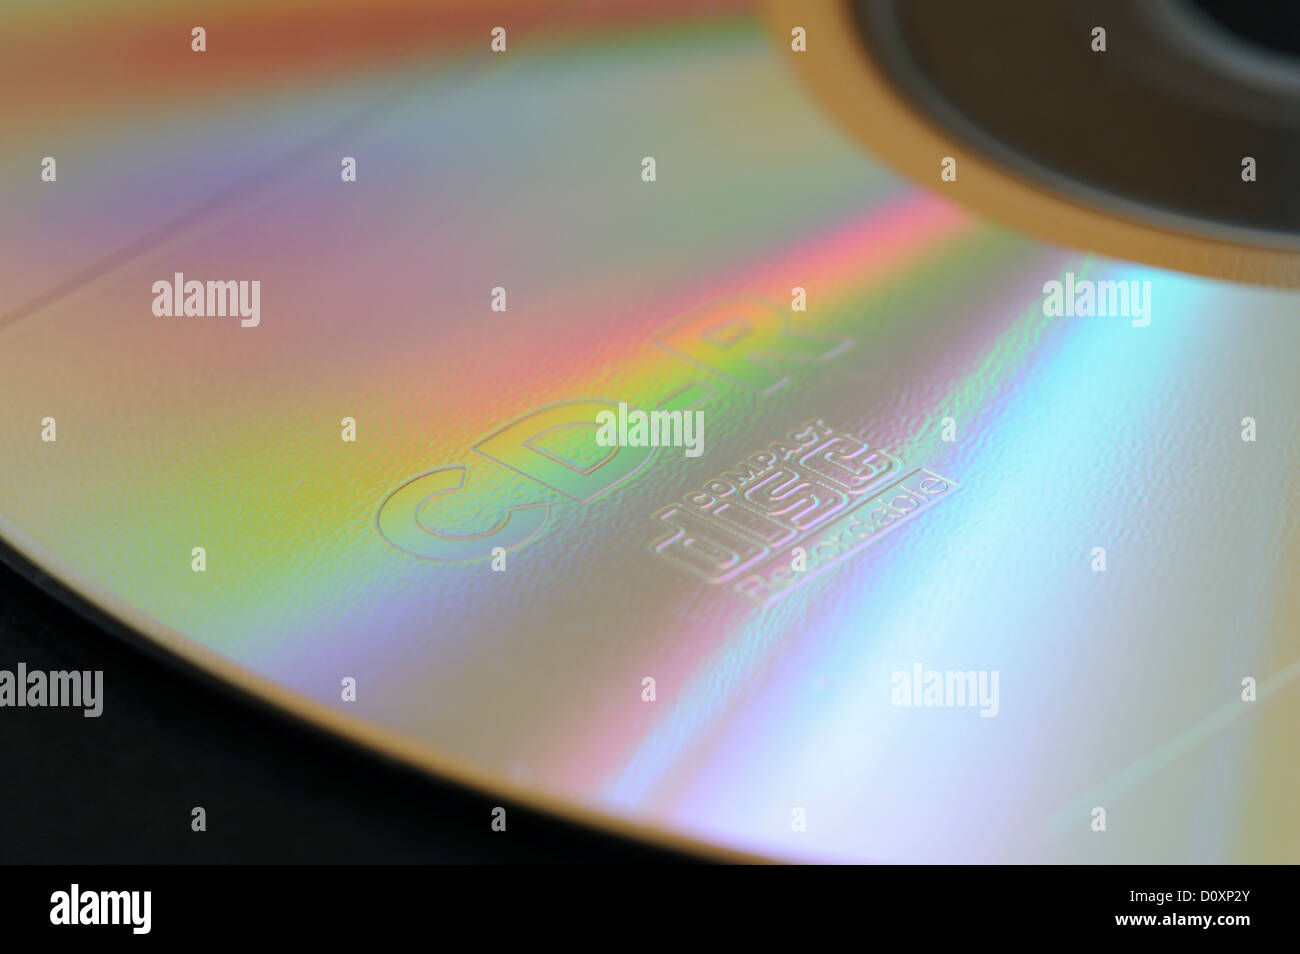 close-up of a shiny compact disc CD-R with spectral colors Stock Photo